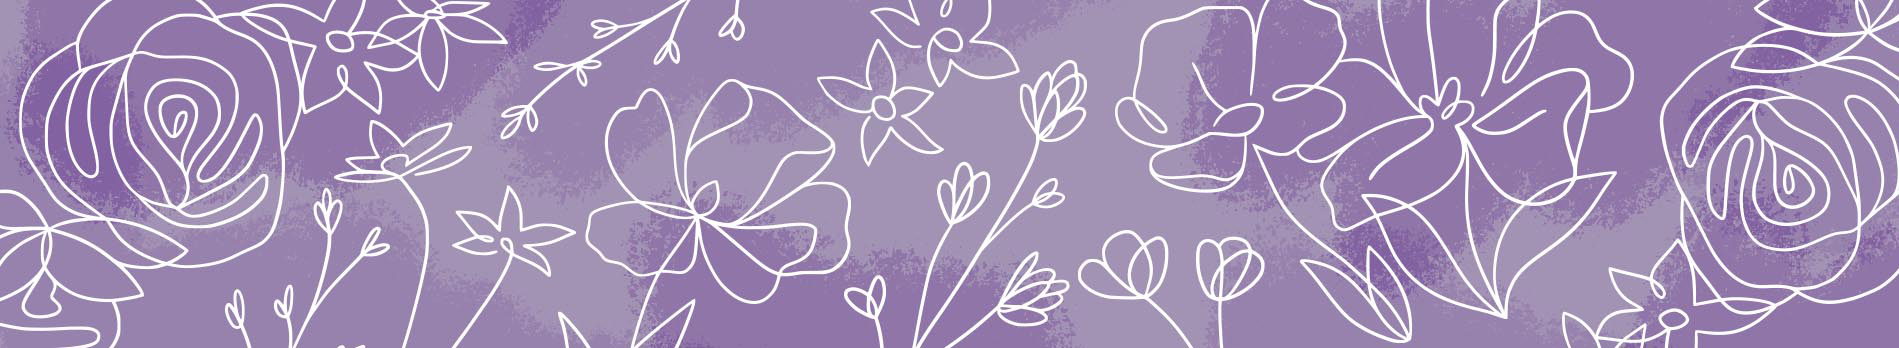 A line drawing of a variety of flowers on a textured purple background.